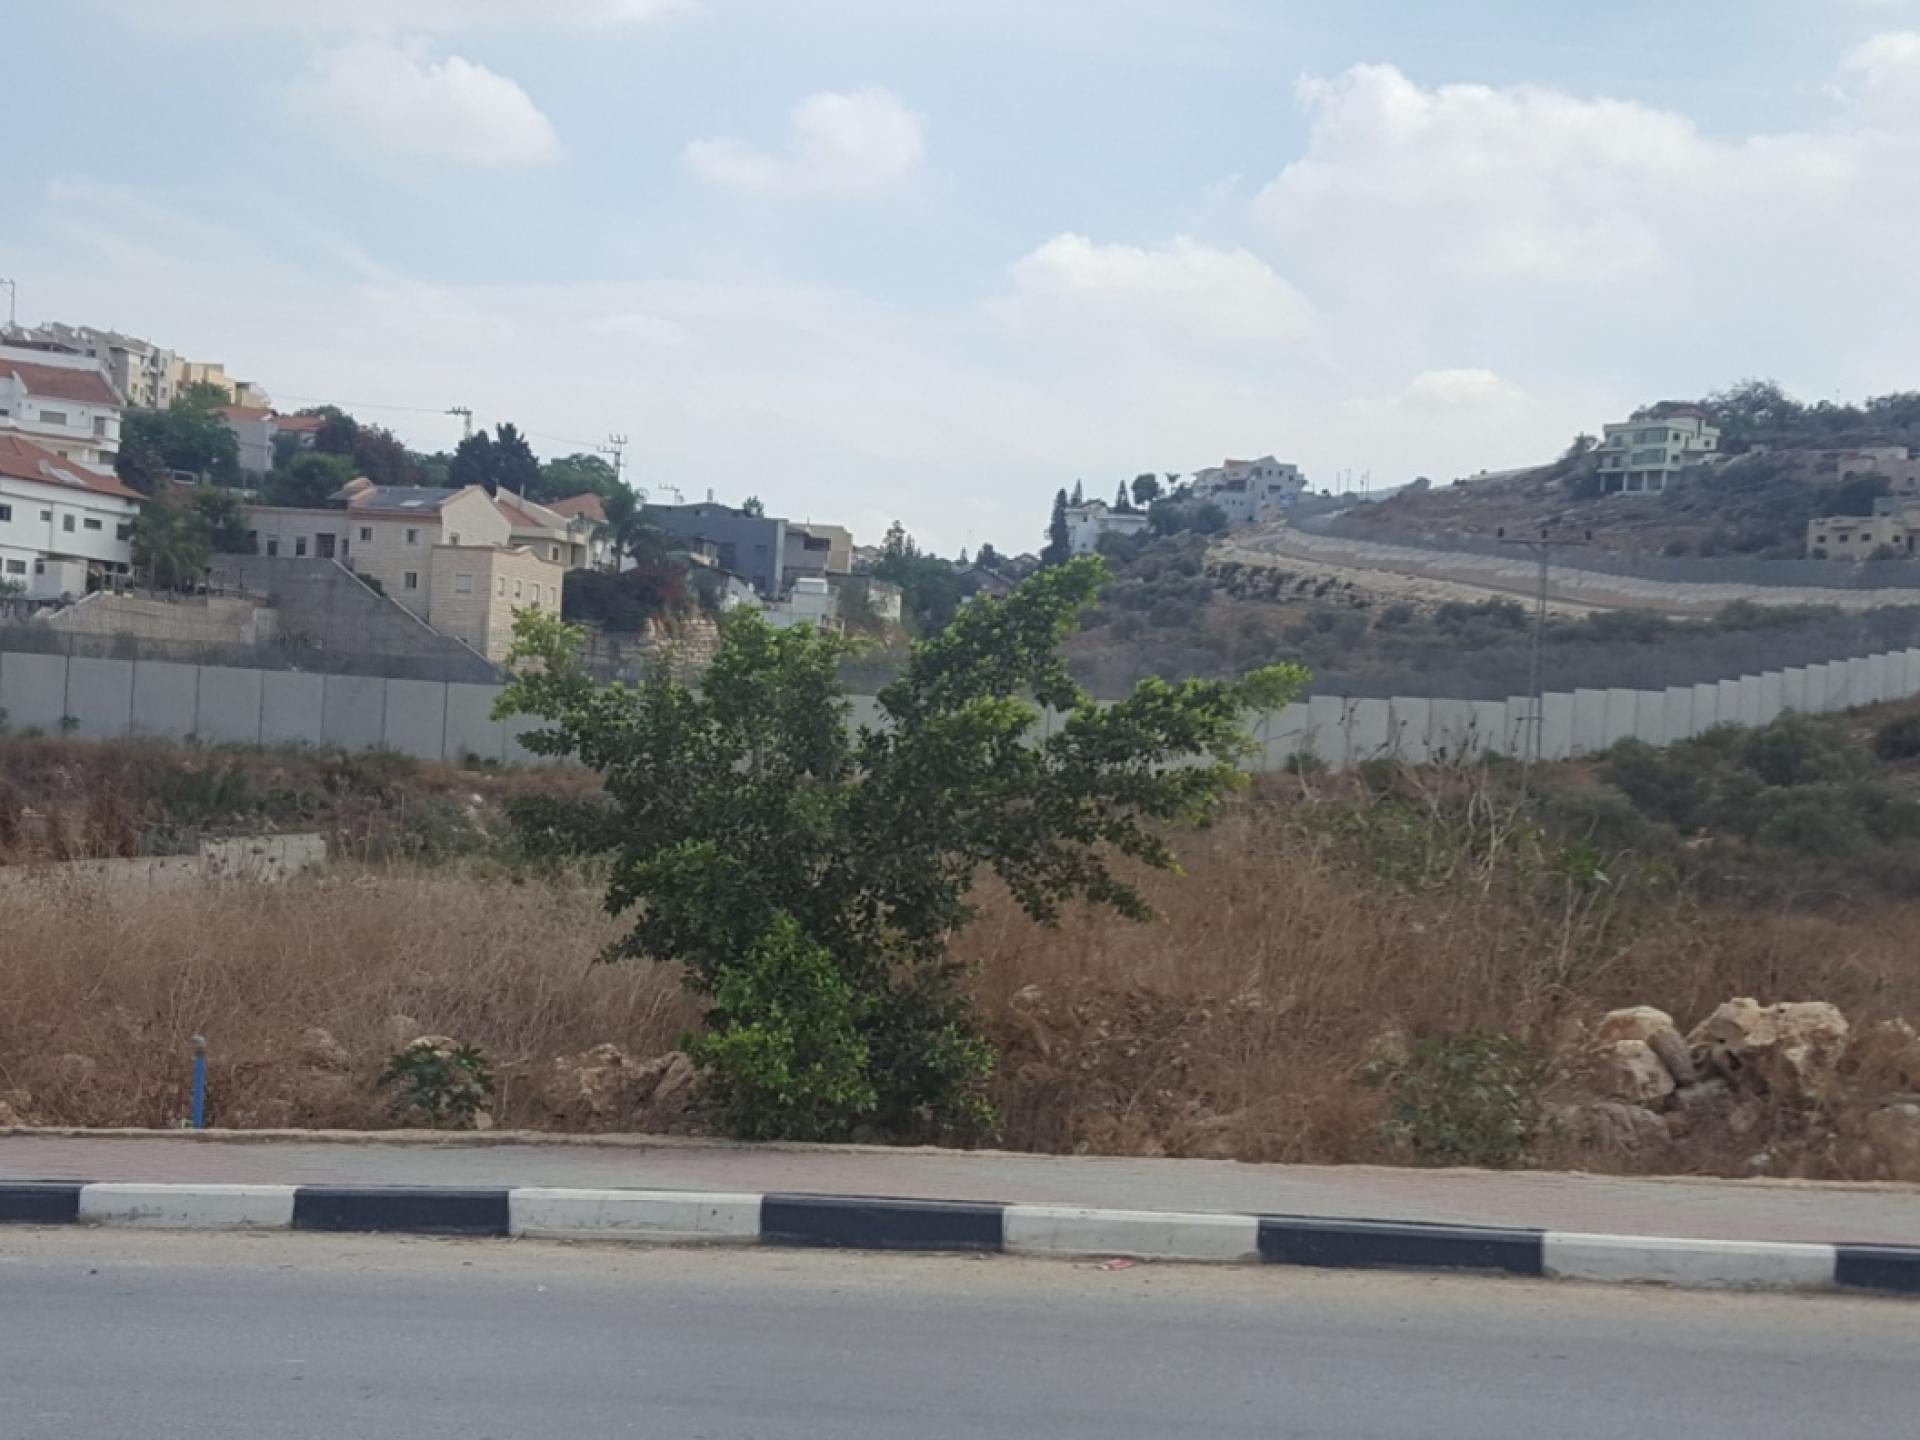 The fence that surrounds Shaarei Tikva